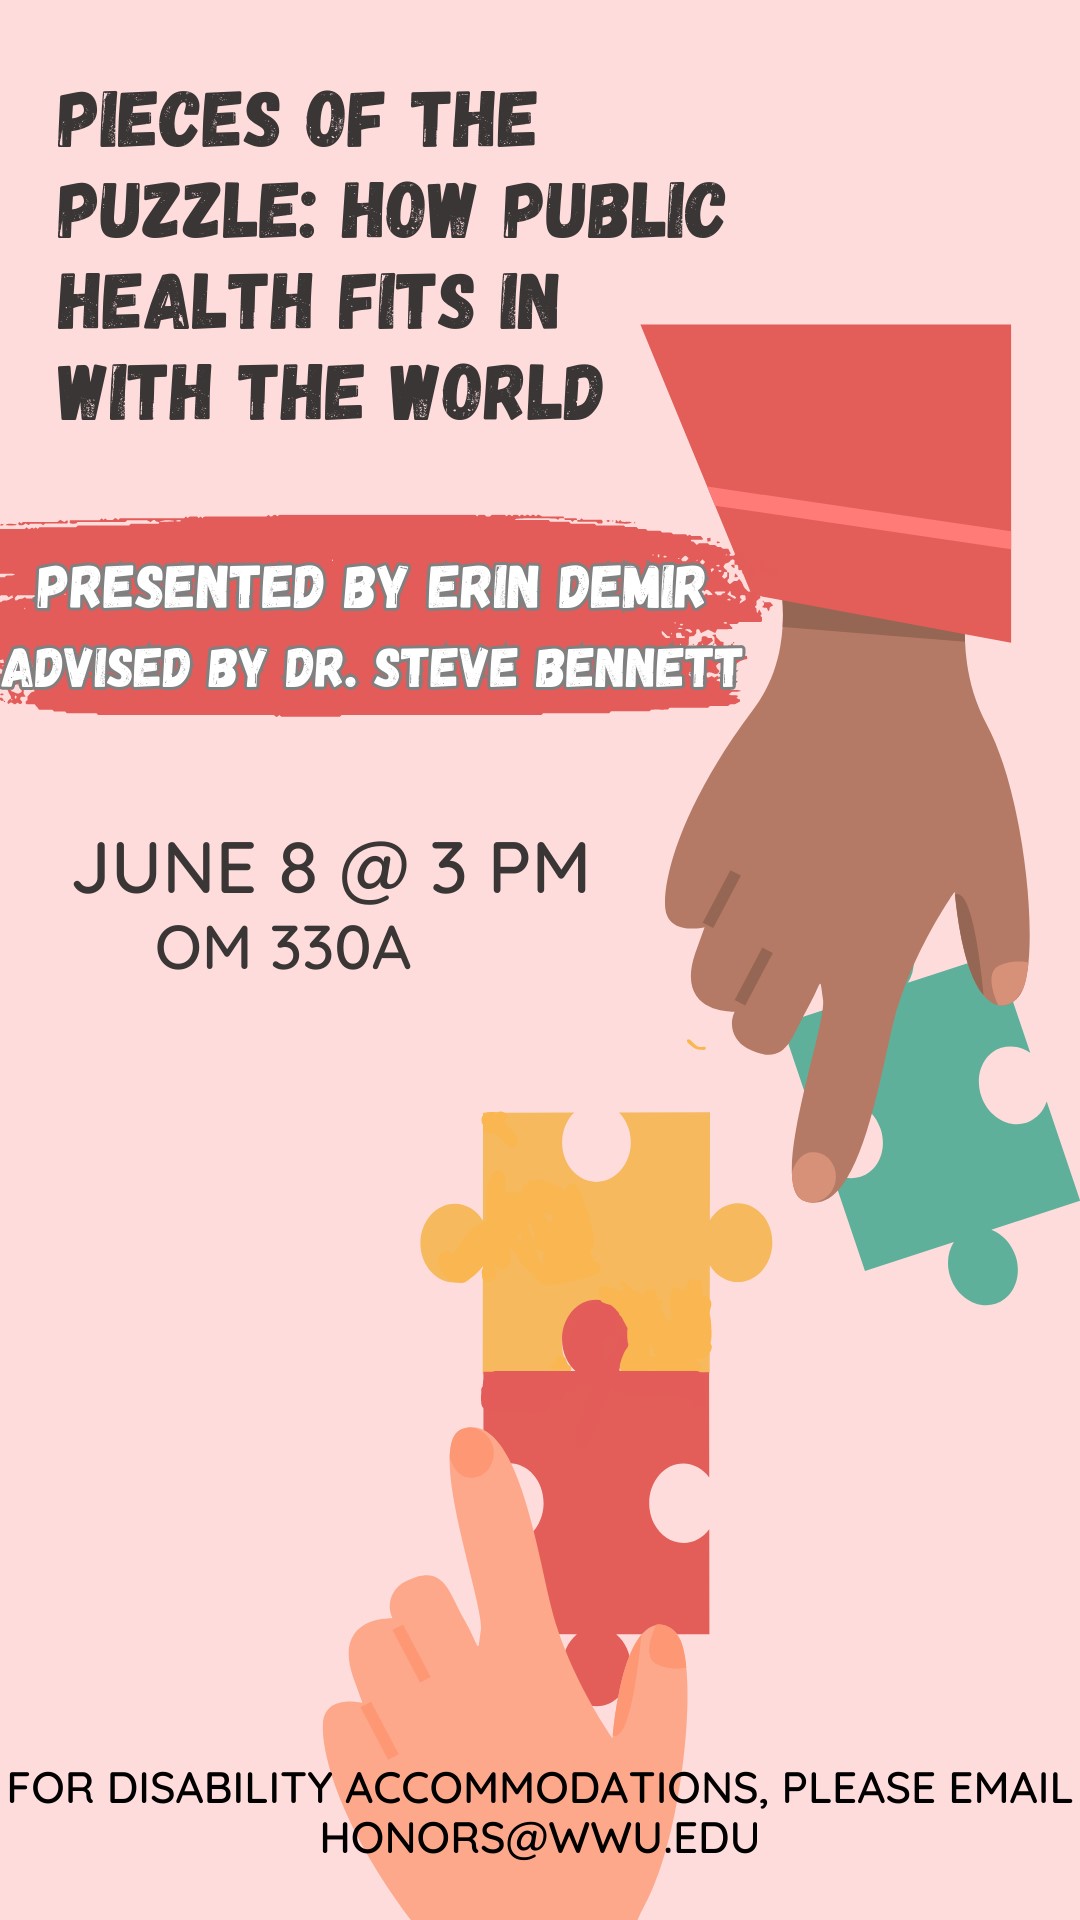 A pink poster with clip art of hands putting puzzle pieces together. Text in the top left corner of the poster reads "Pieces of the Puzzle- How Public Health Fits in with the World". Below that an orange banner with white lettering reads "Presented by Erin Demir, Advised by Dr. Steve Bennett". Below that in black text reads "June 8 @ 3 PM, OM 330A".